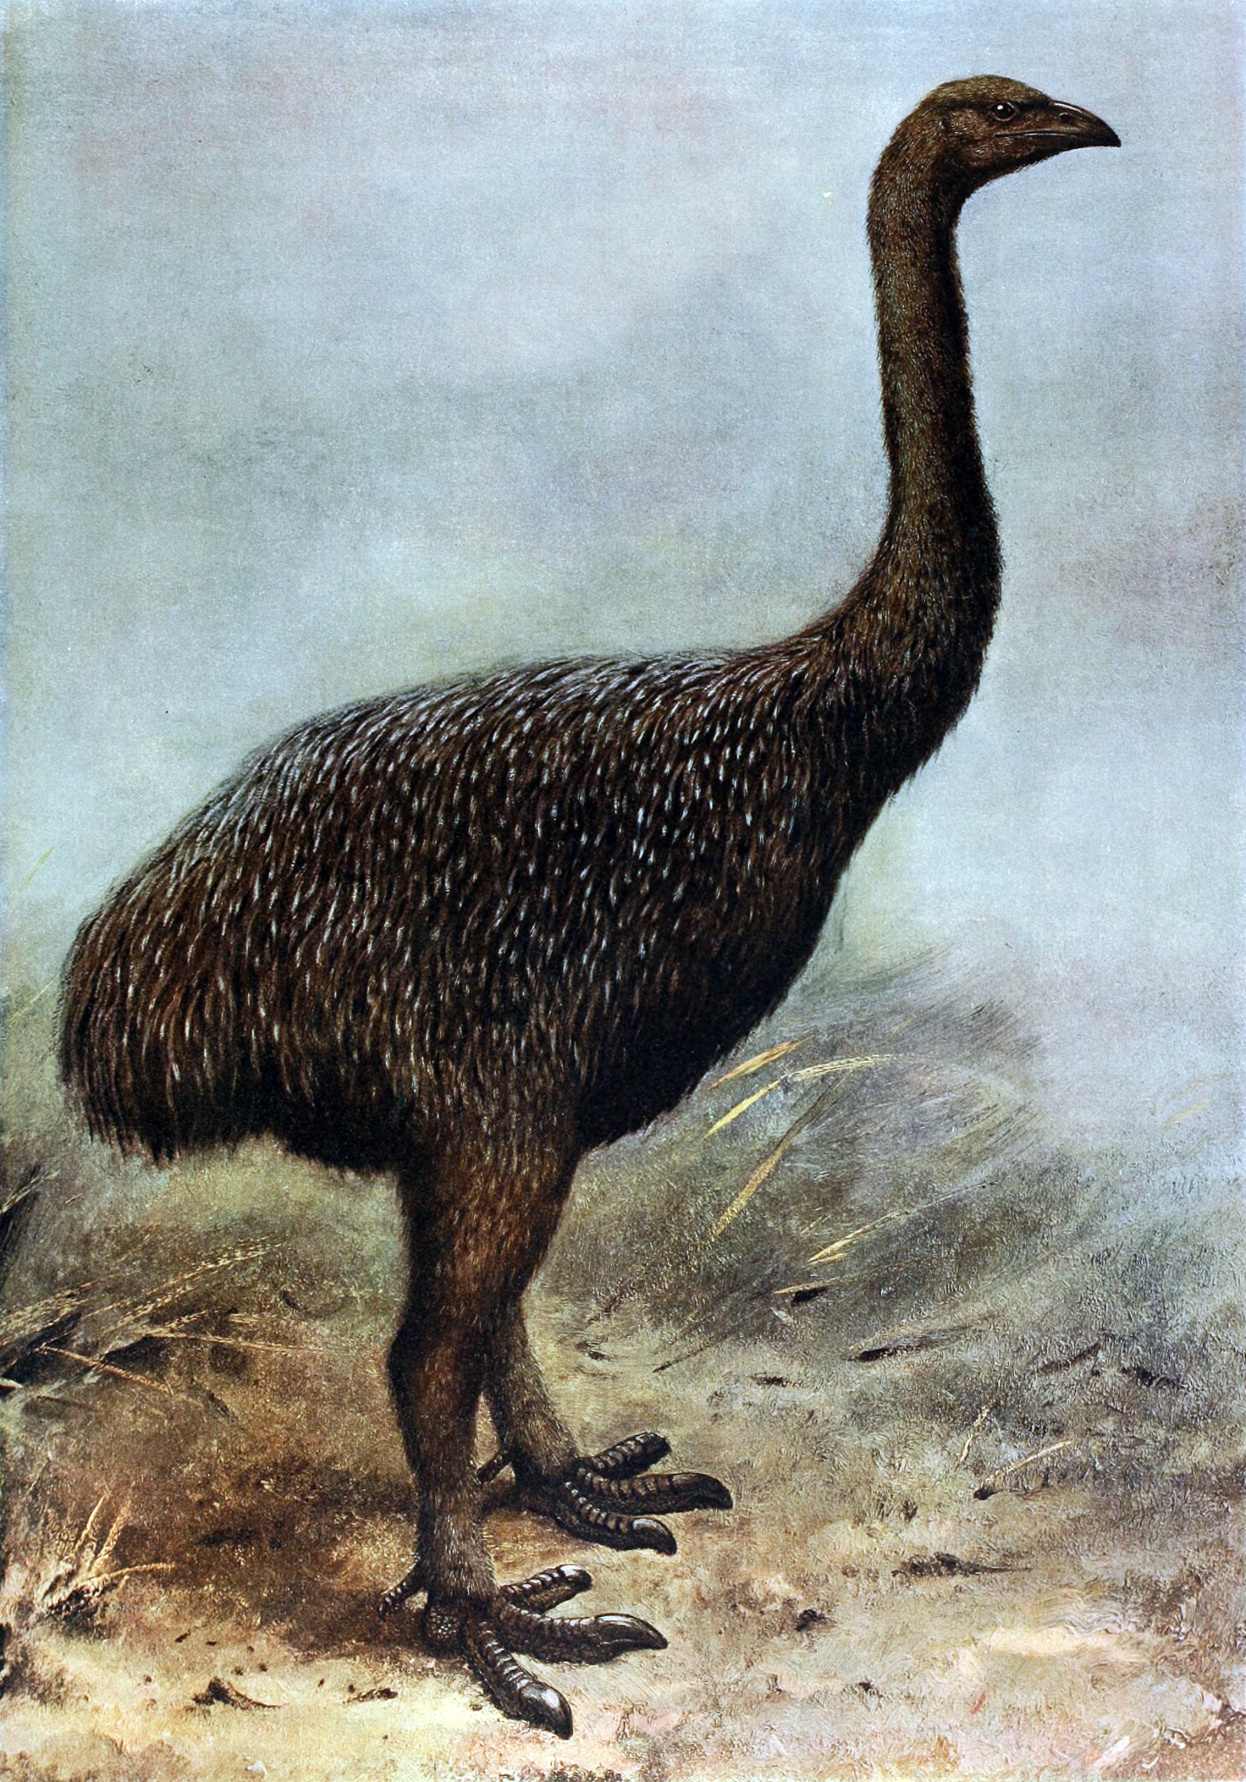 The claw turned out to have belonged to a now-extinct flightless species called moa.